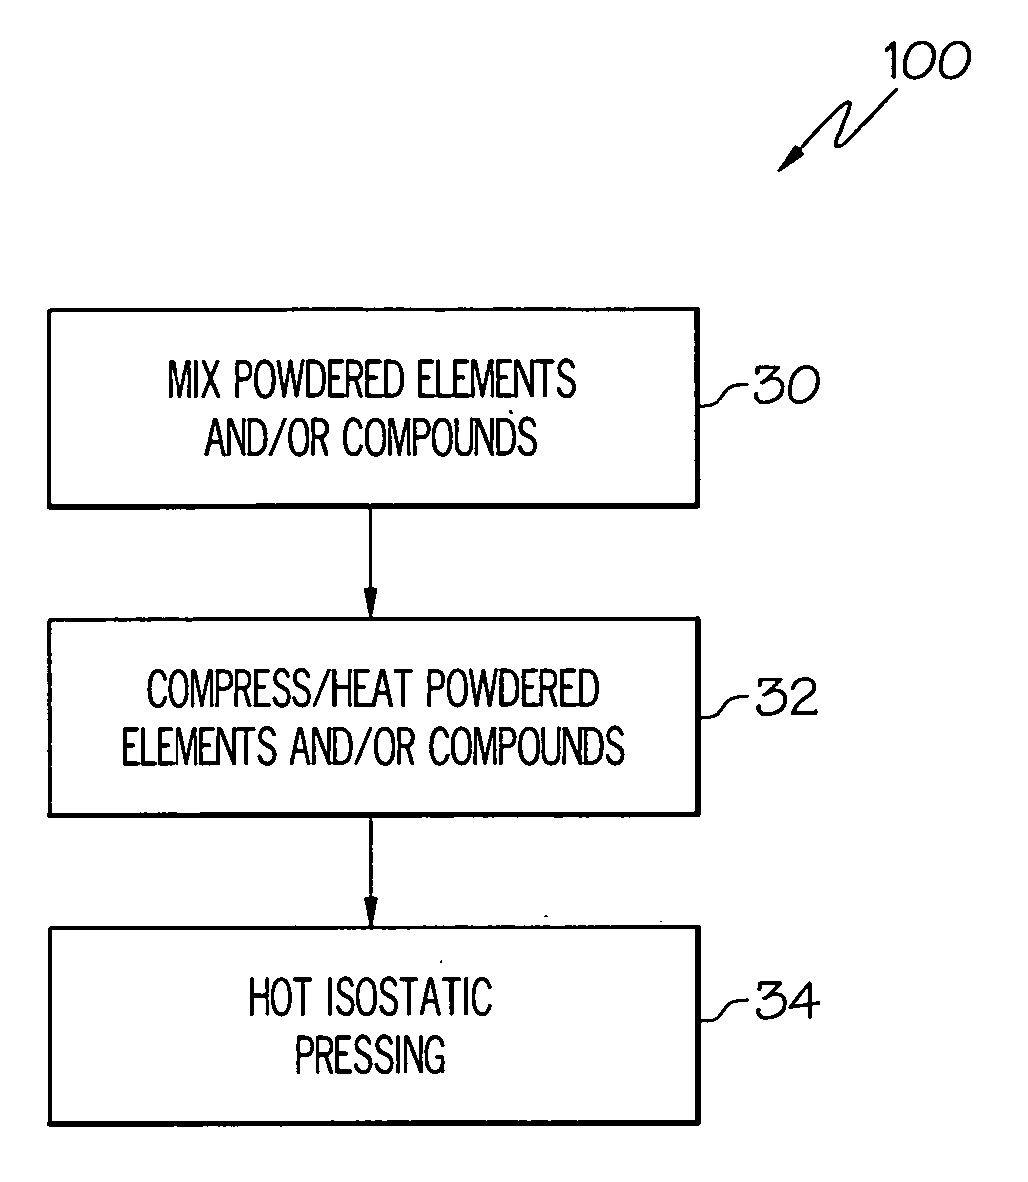 Ternary carbide and nitride materials having tribological applications and methods of making same